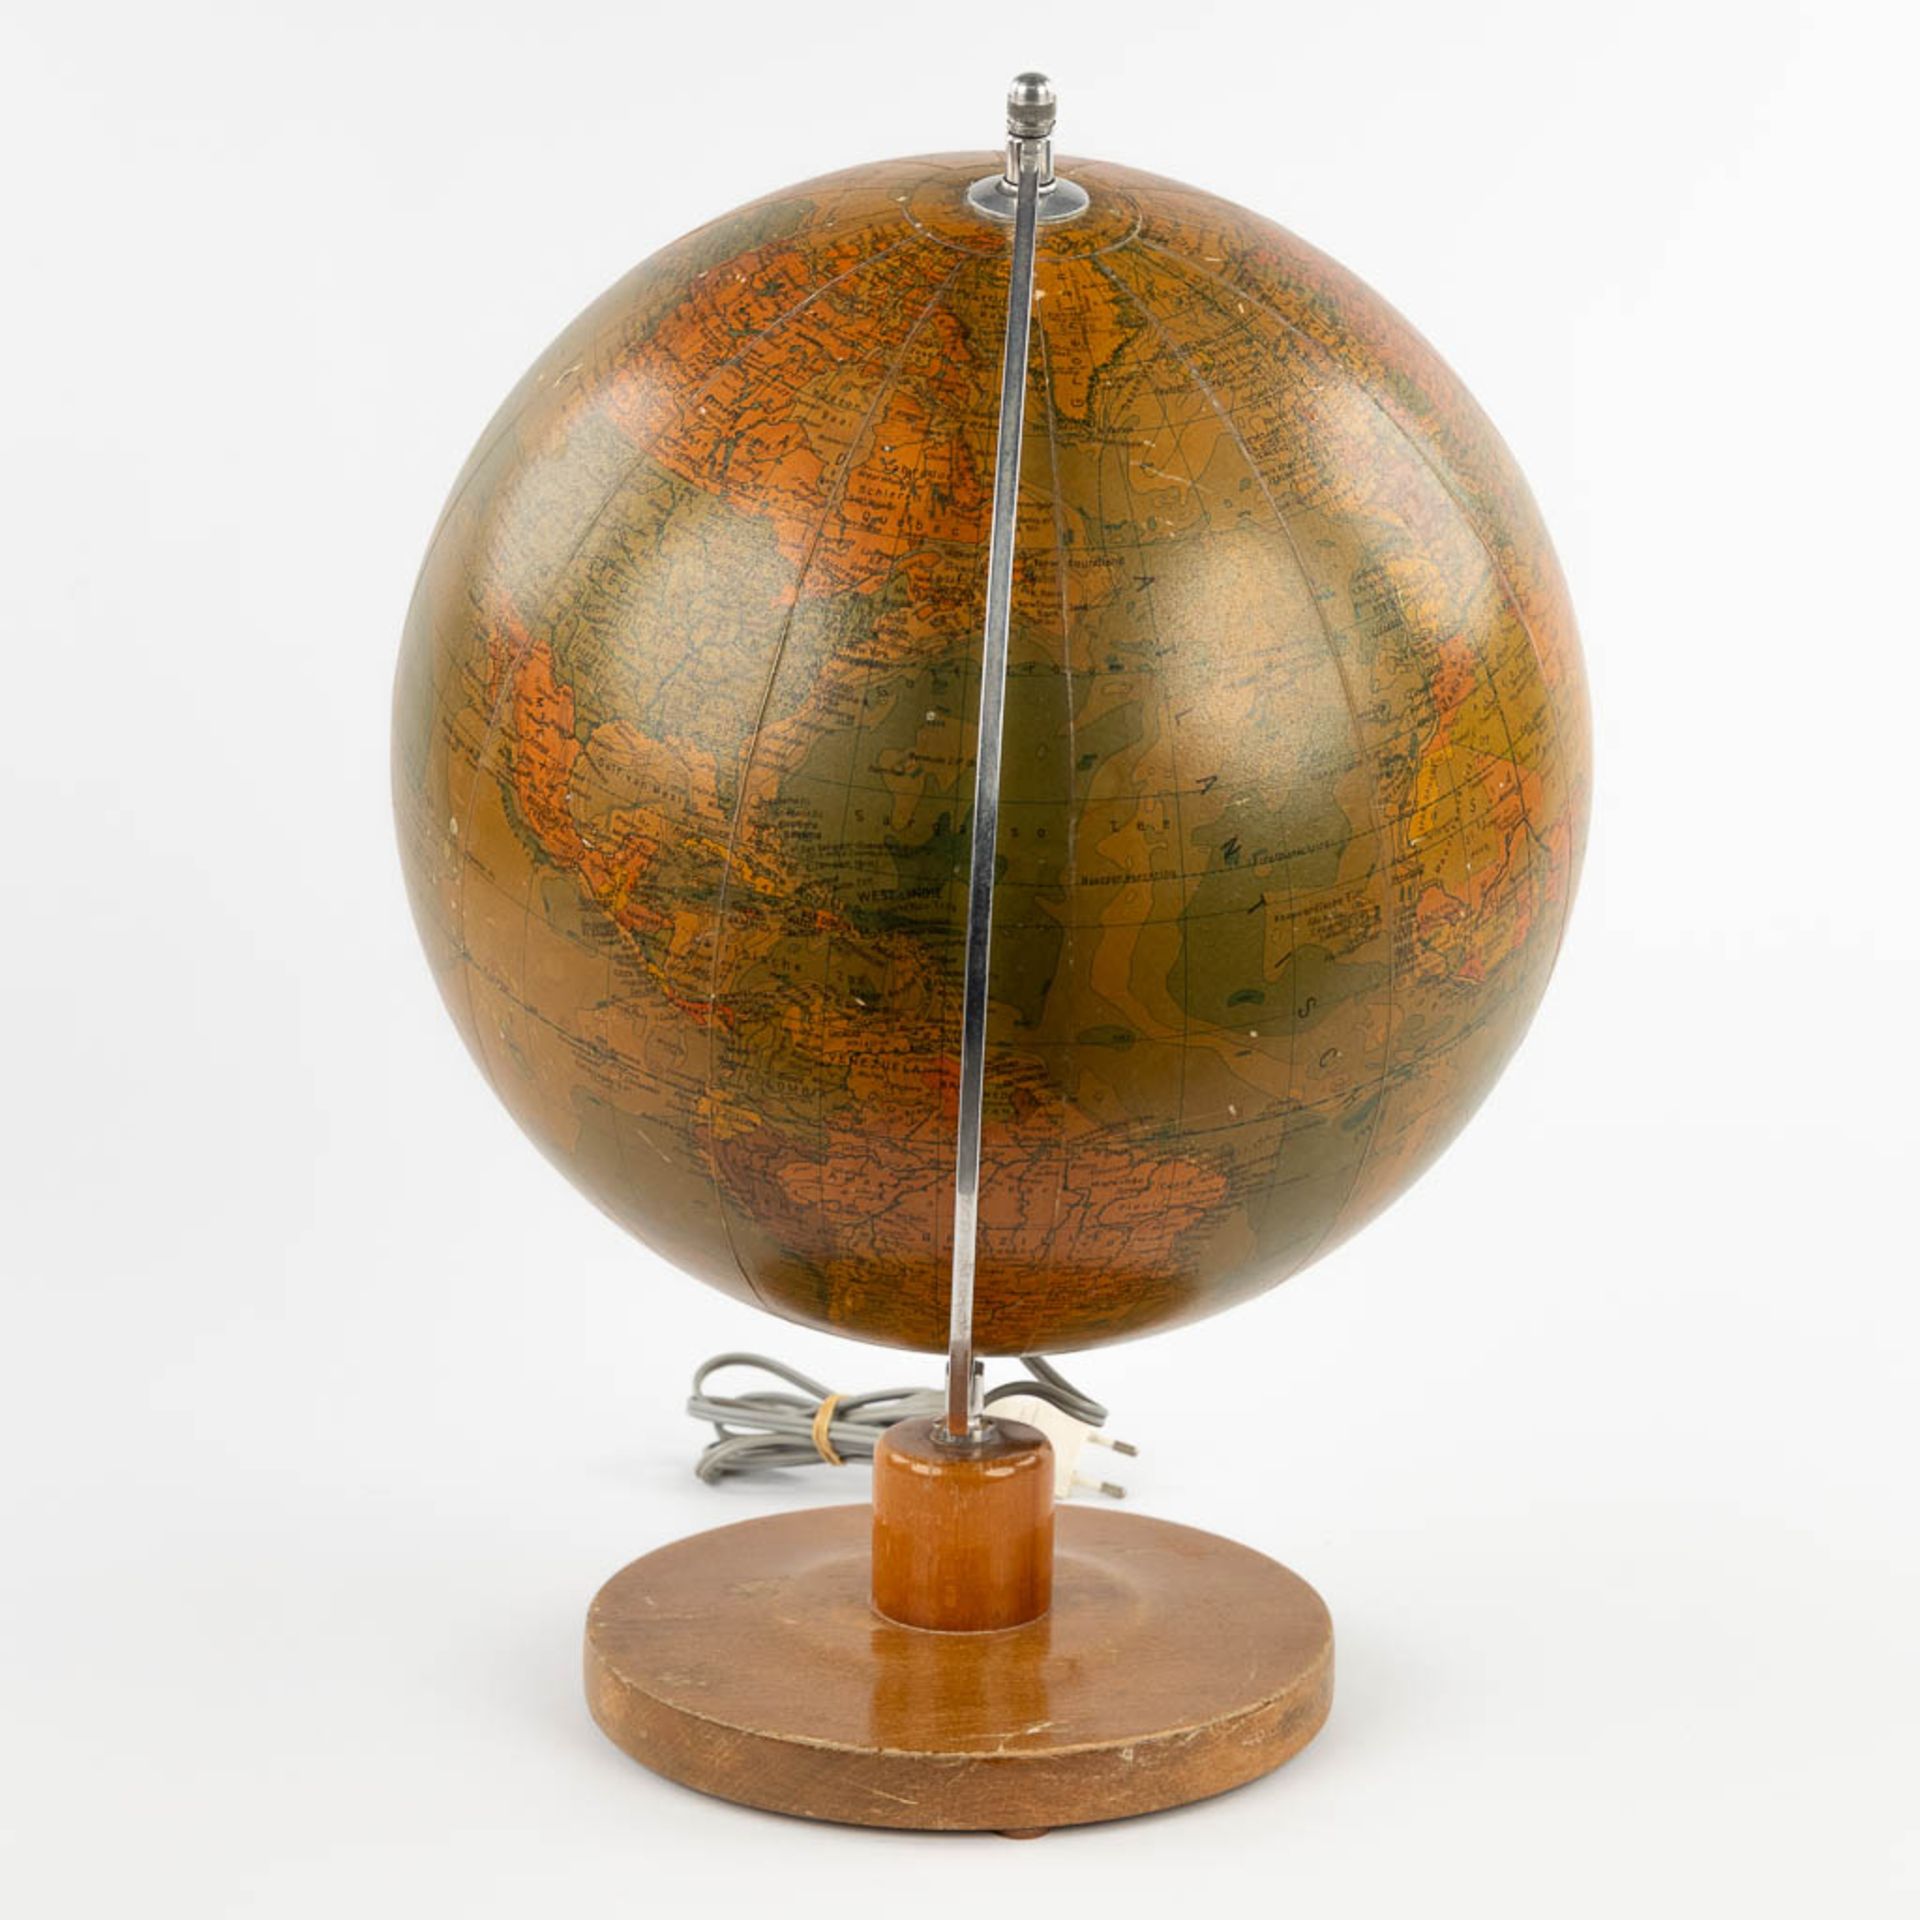 A mid-century globe on a wood base, with illumination. Glass, Circa 1960. (H:46 x D:33 cm) - Image 4 of 16